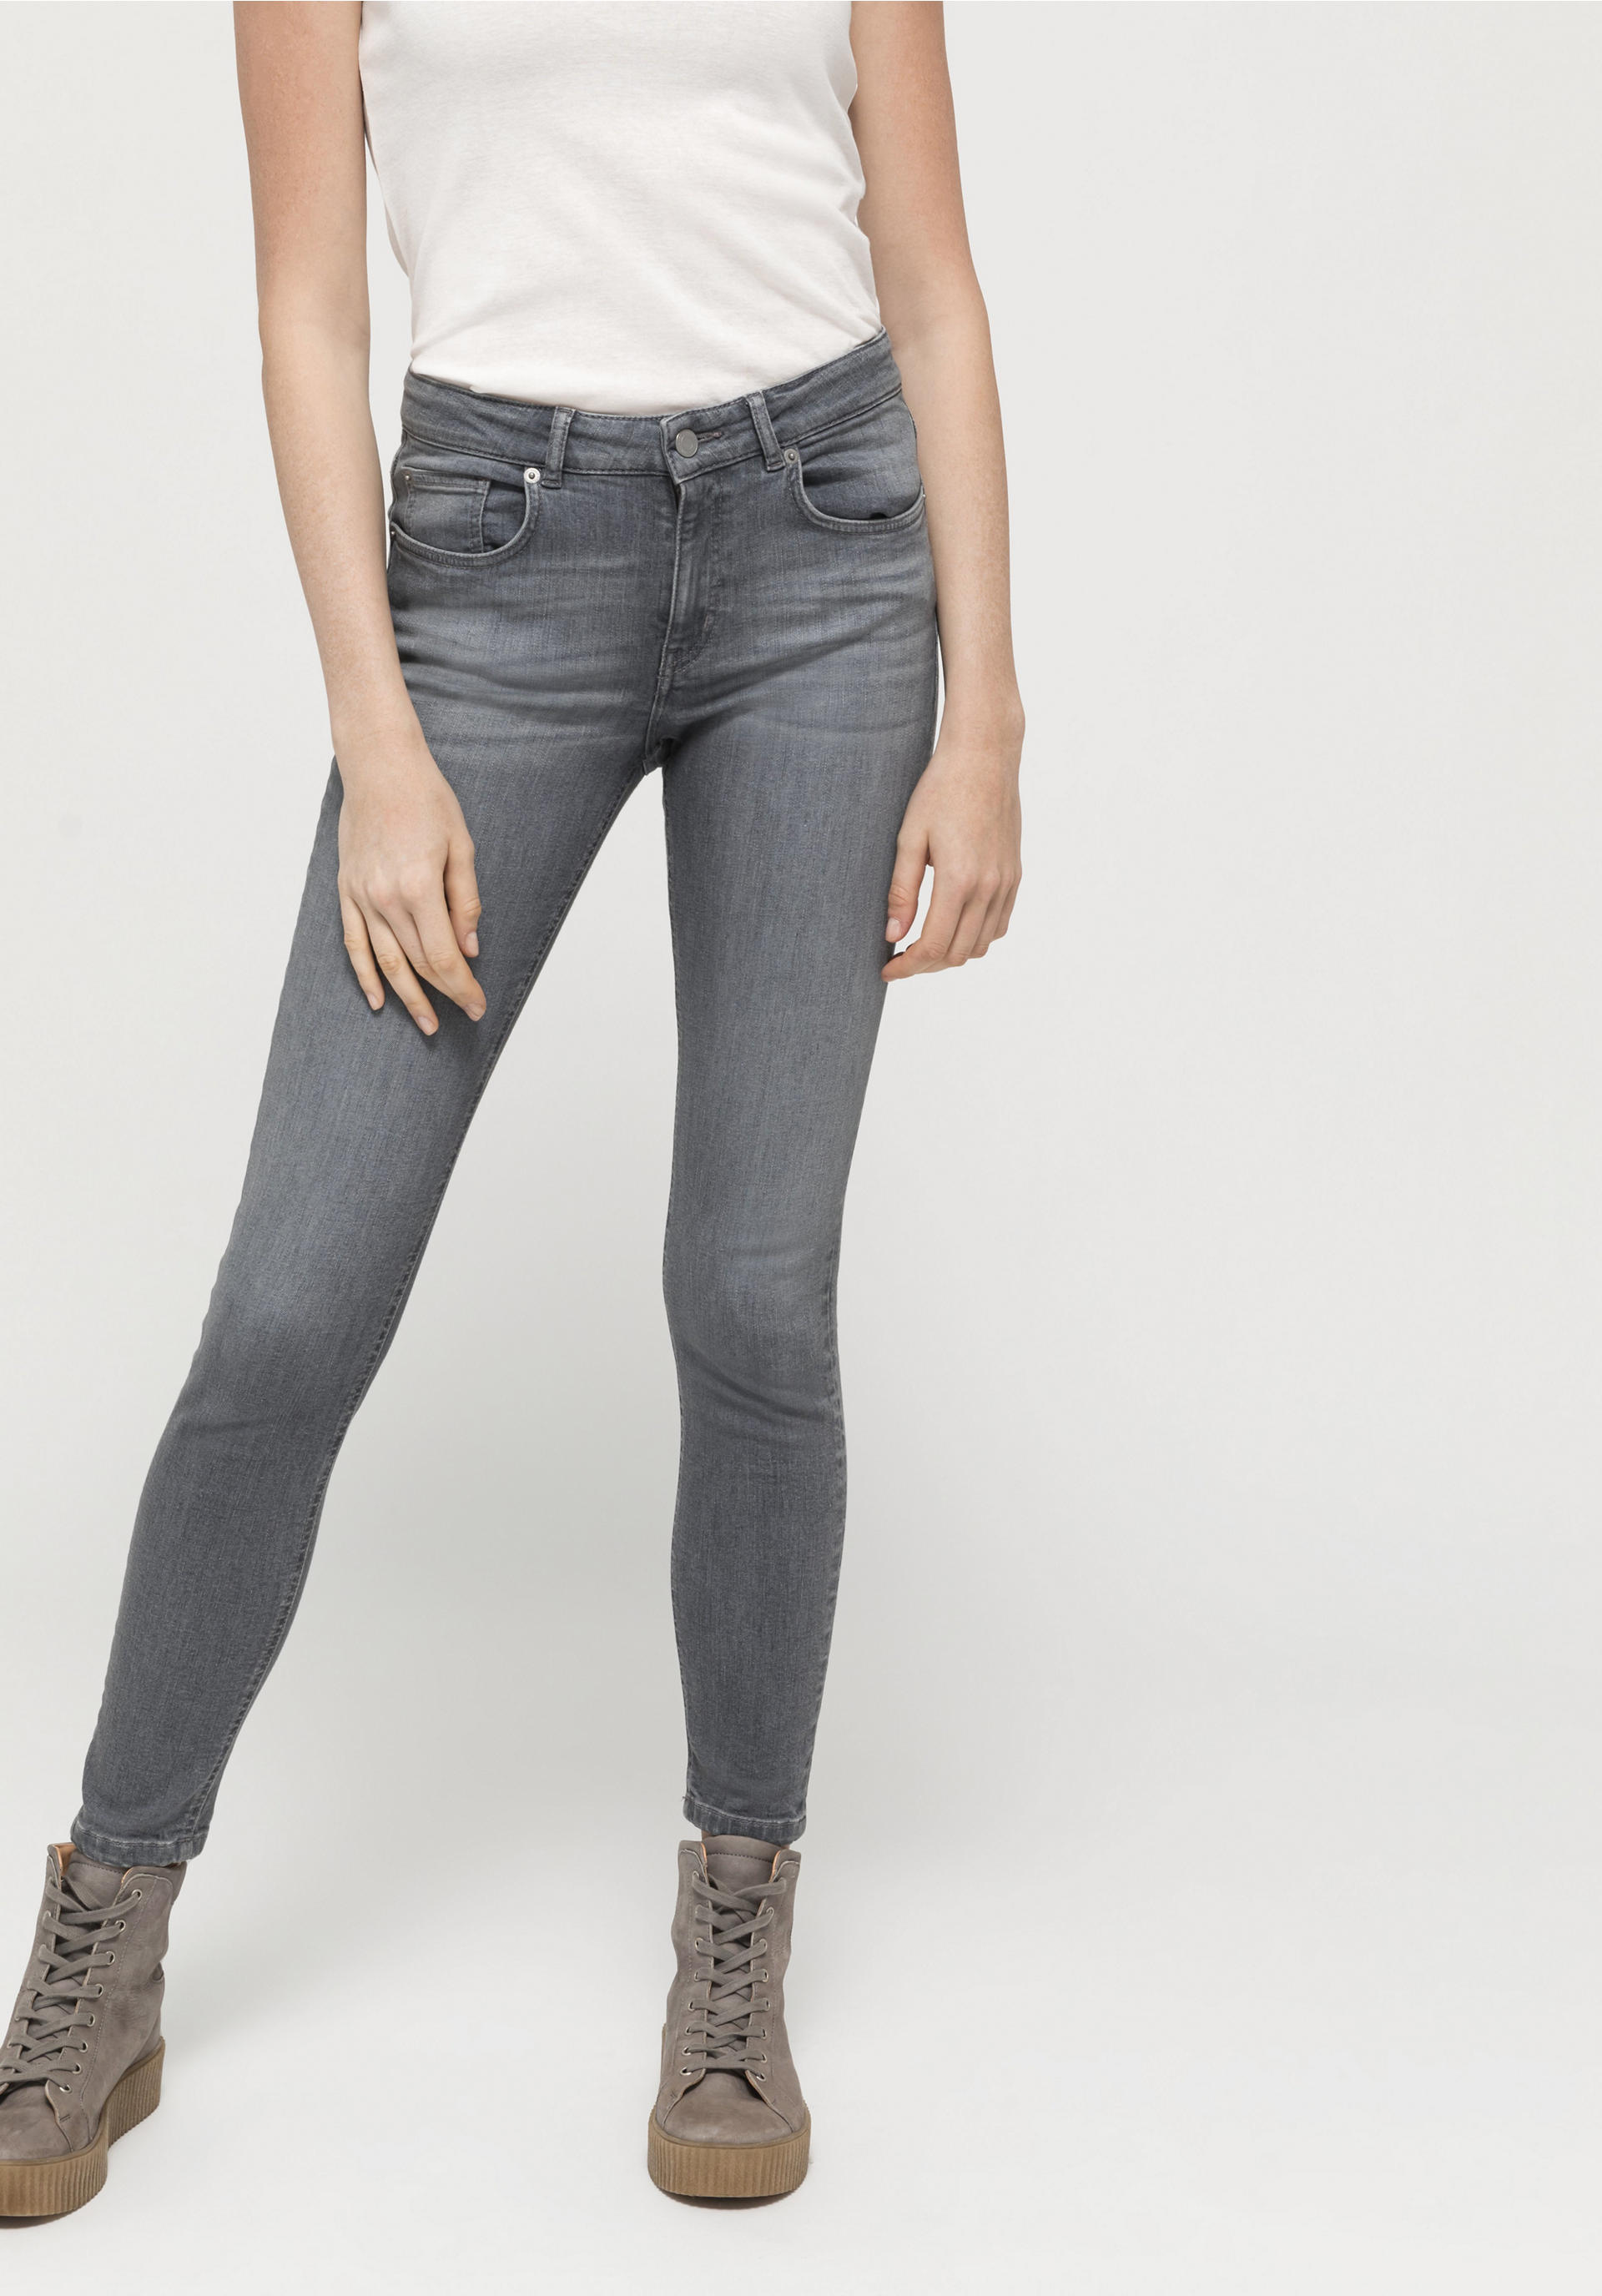 Lina skinny fit jeans made of organic denim for women - hessnatur ...